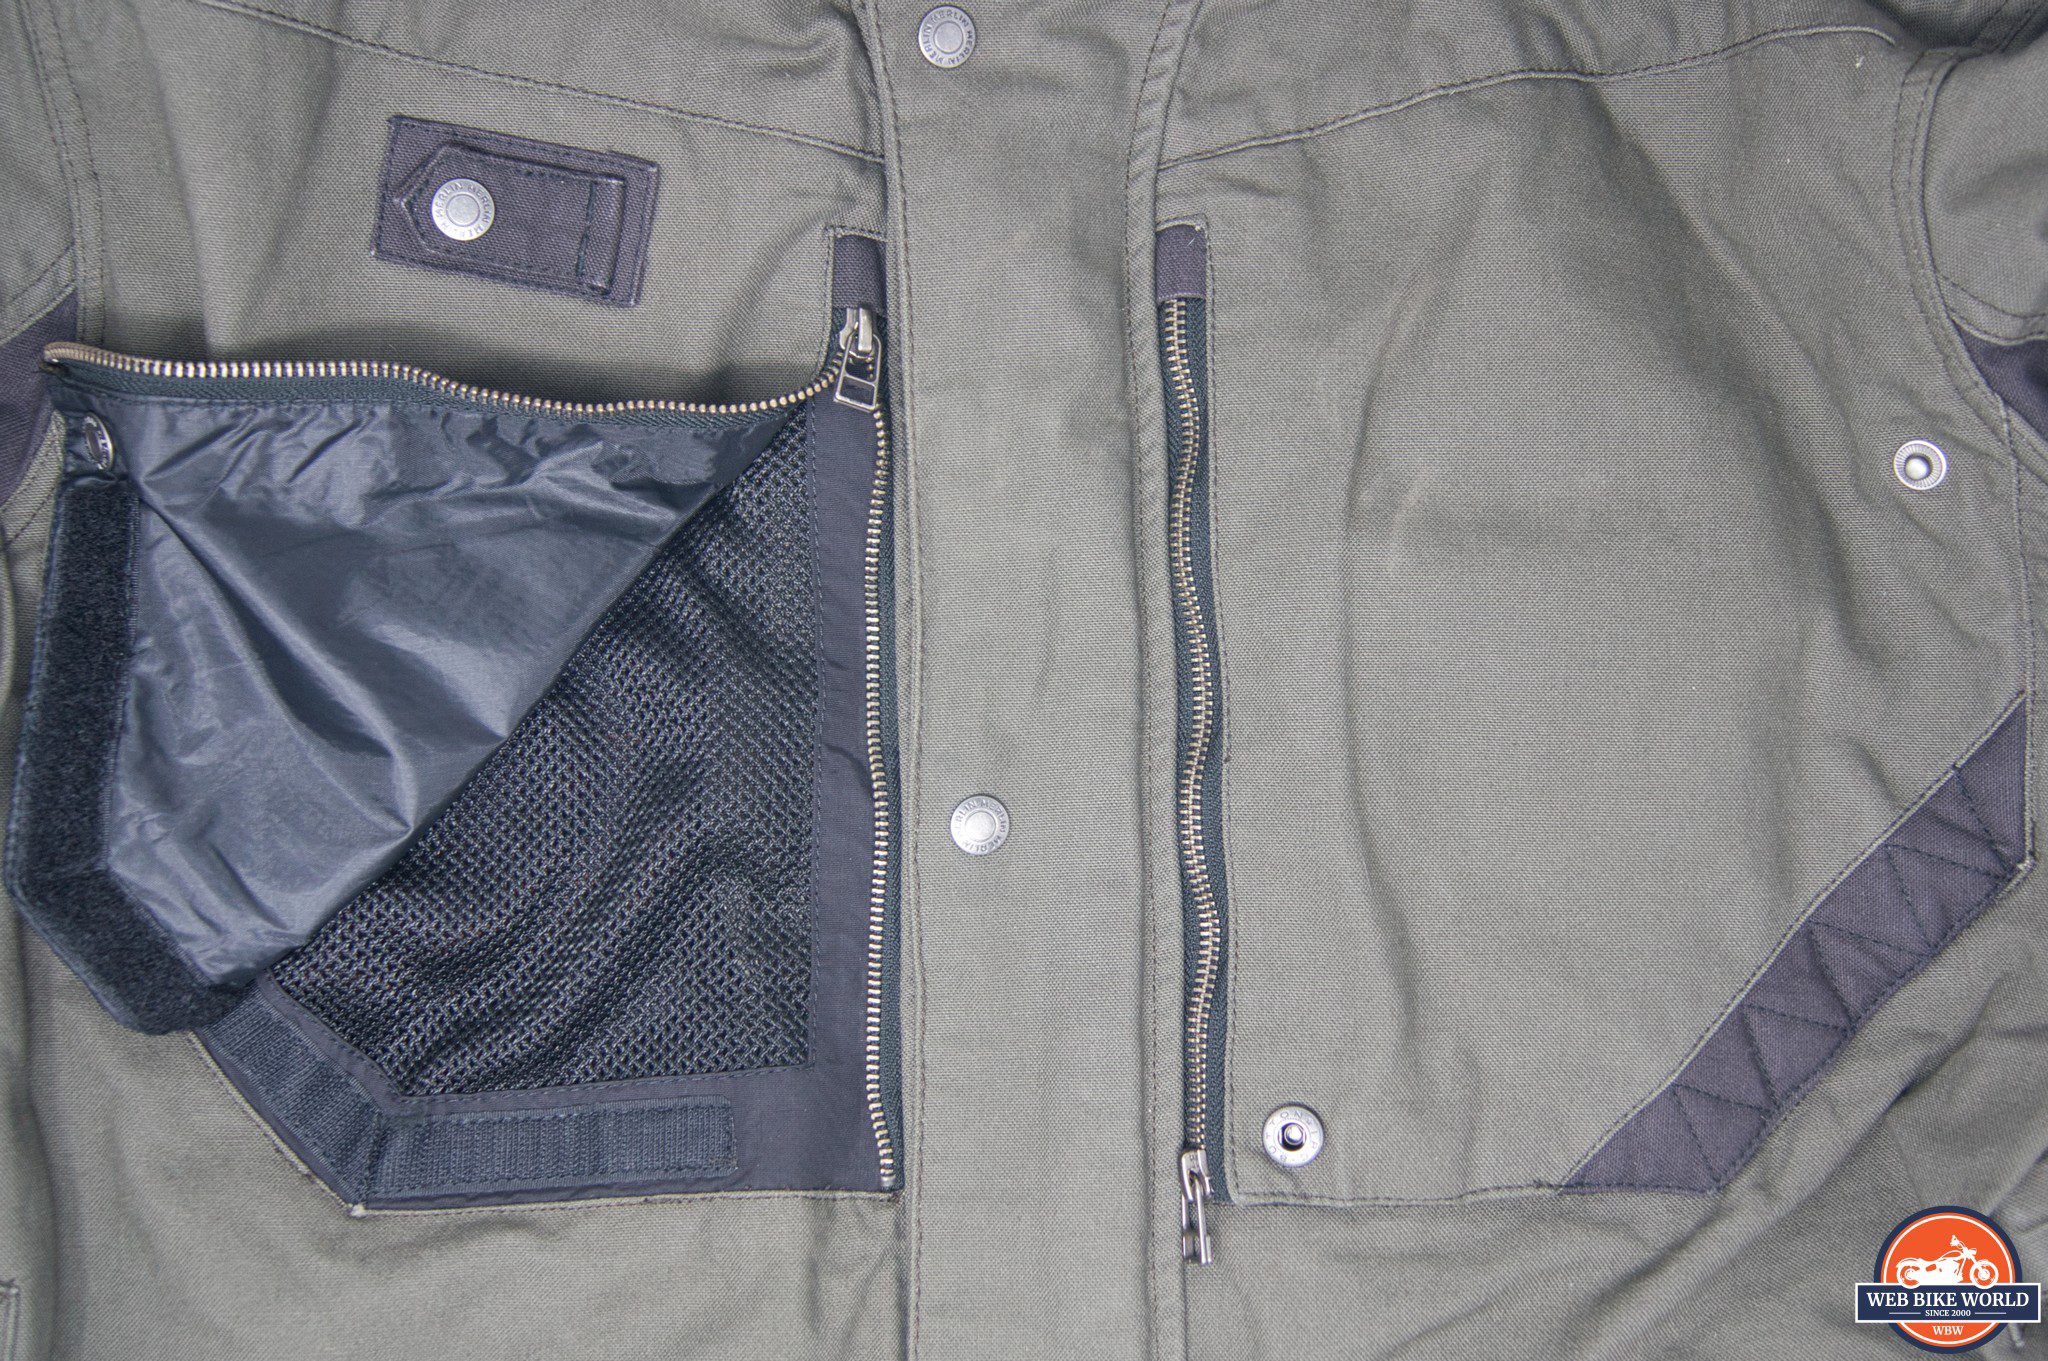 Chest panel vents on the jacket